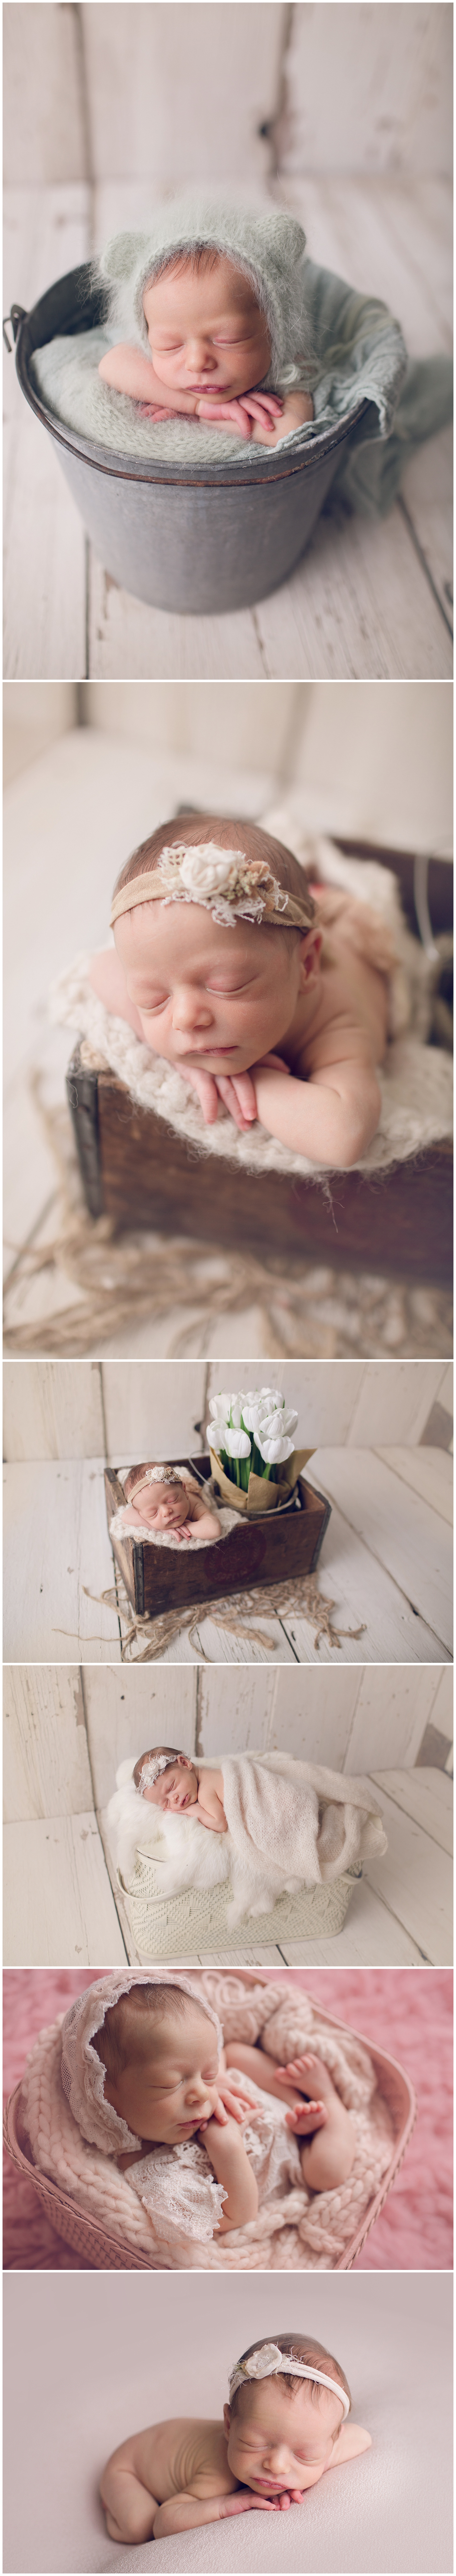 Baby E's Newborn Photography Session | Chicago Newborn Photographer | Patricia Anderson Photography